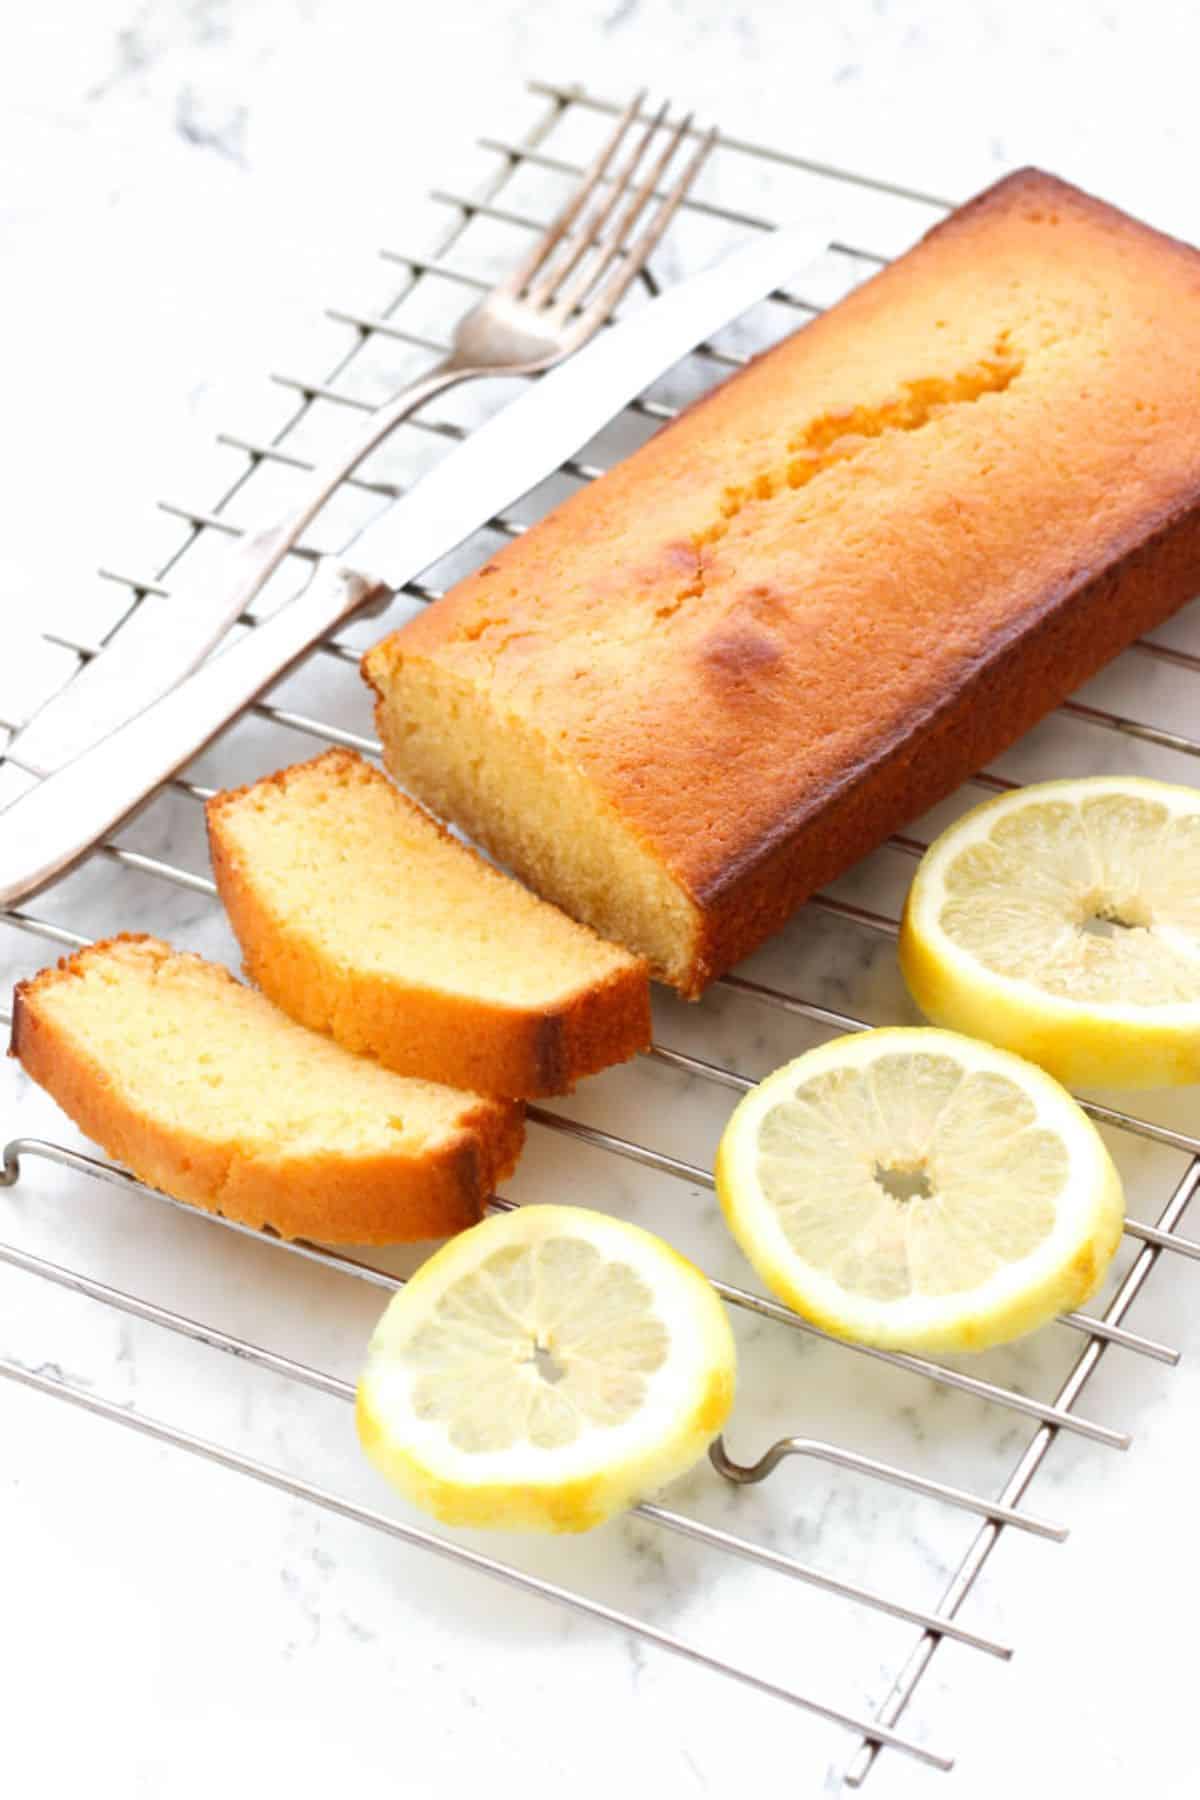 Easy Lemon Yogurt Cake (Gluten-free) on a resting grid with a cutlery and pieces of lemon.